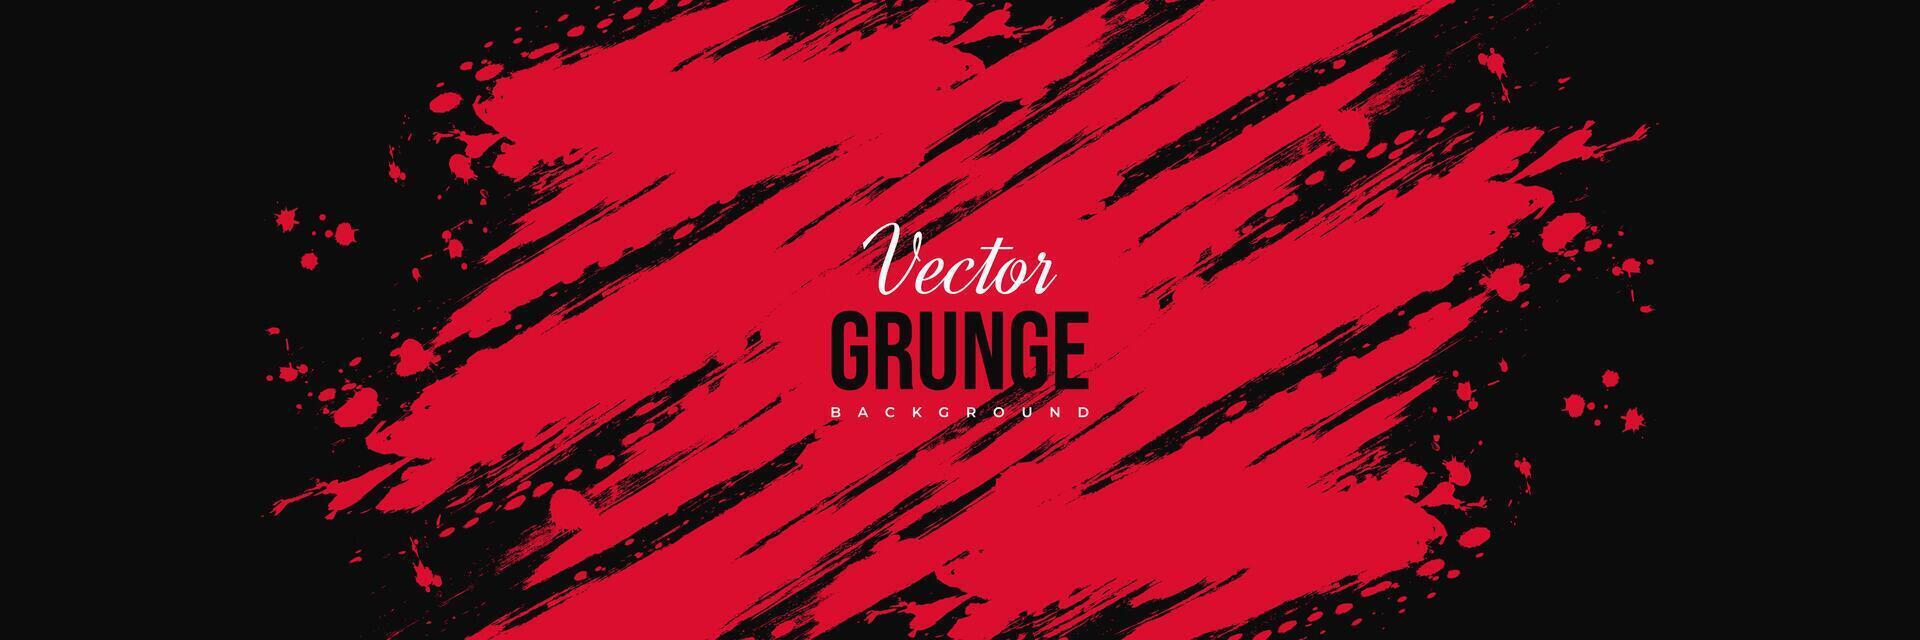 Abstract Red and Black Dirty Grunge Background. Sports Background with Brush Stroke Illustration vector